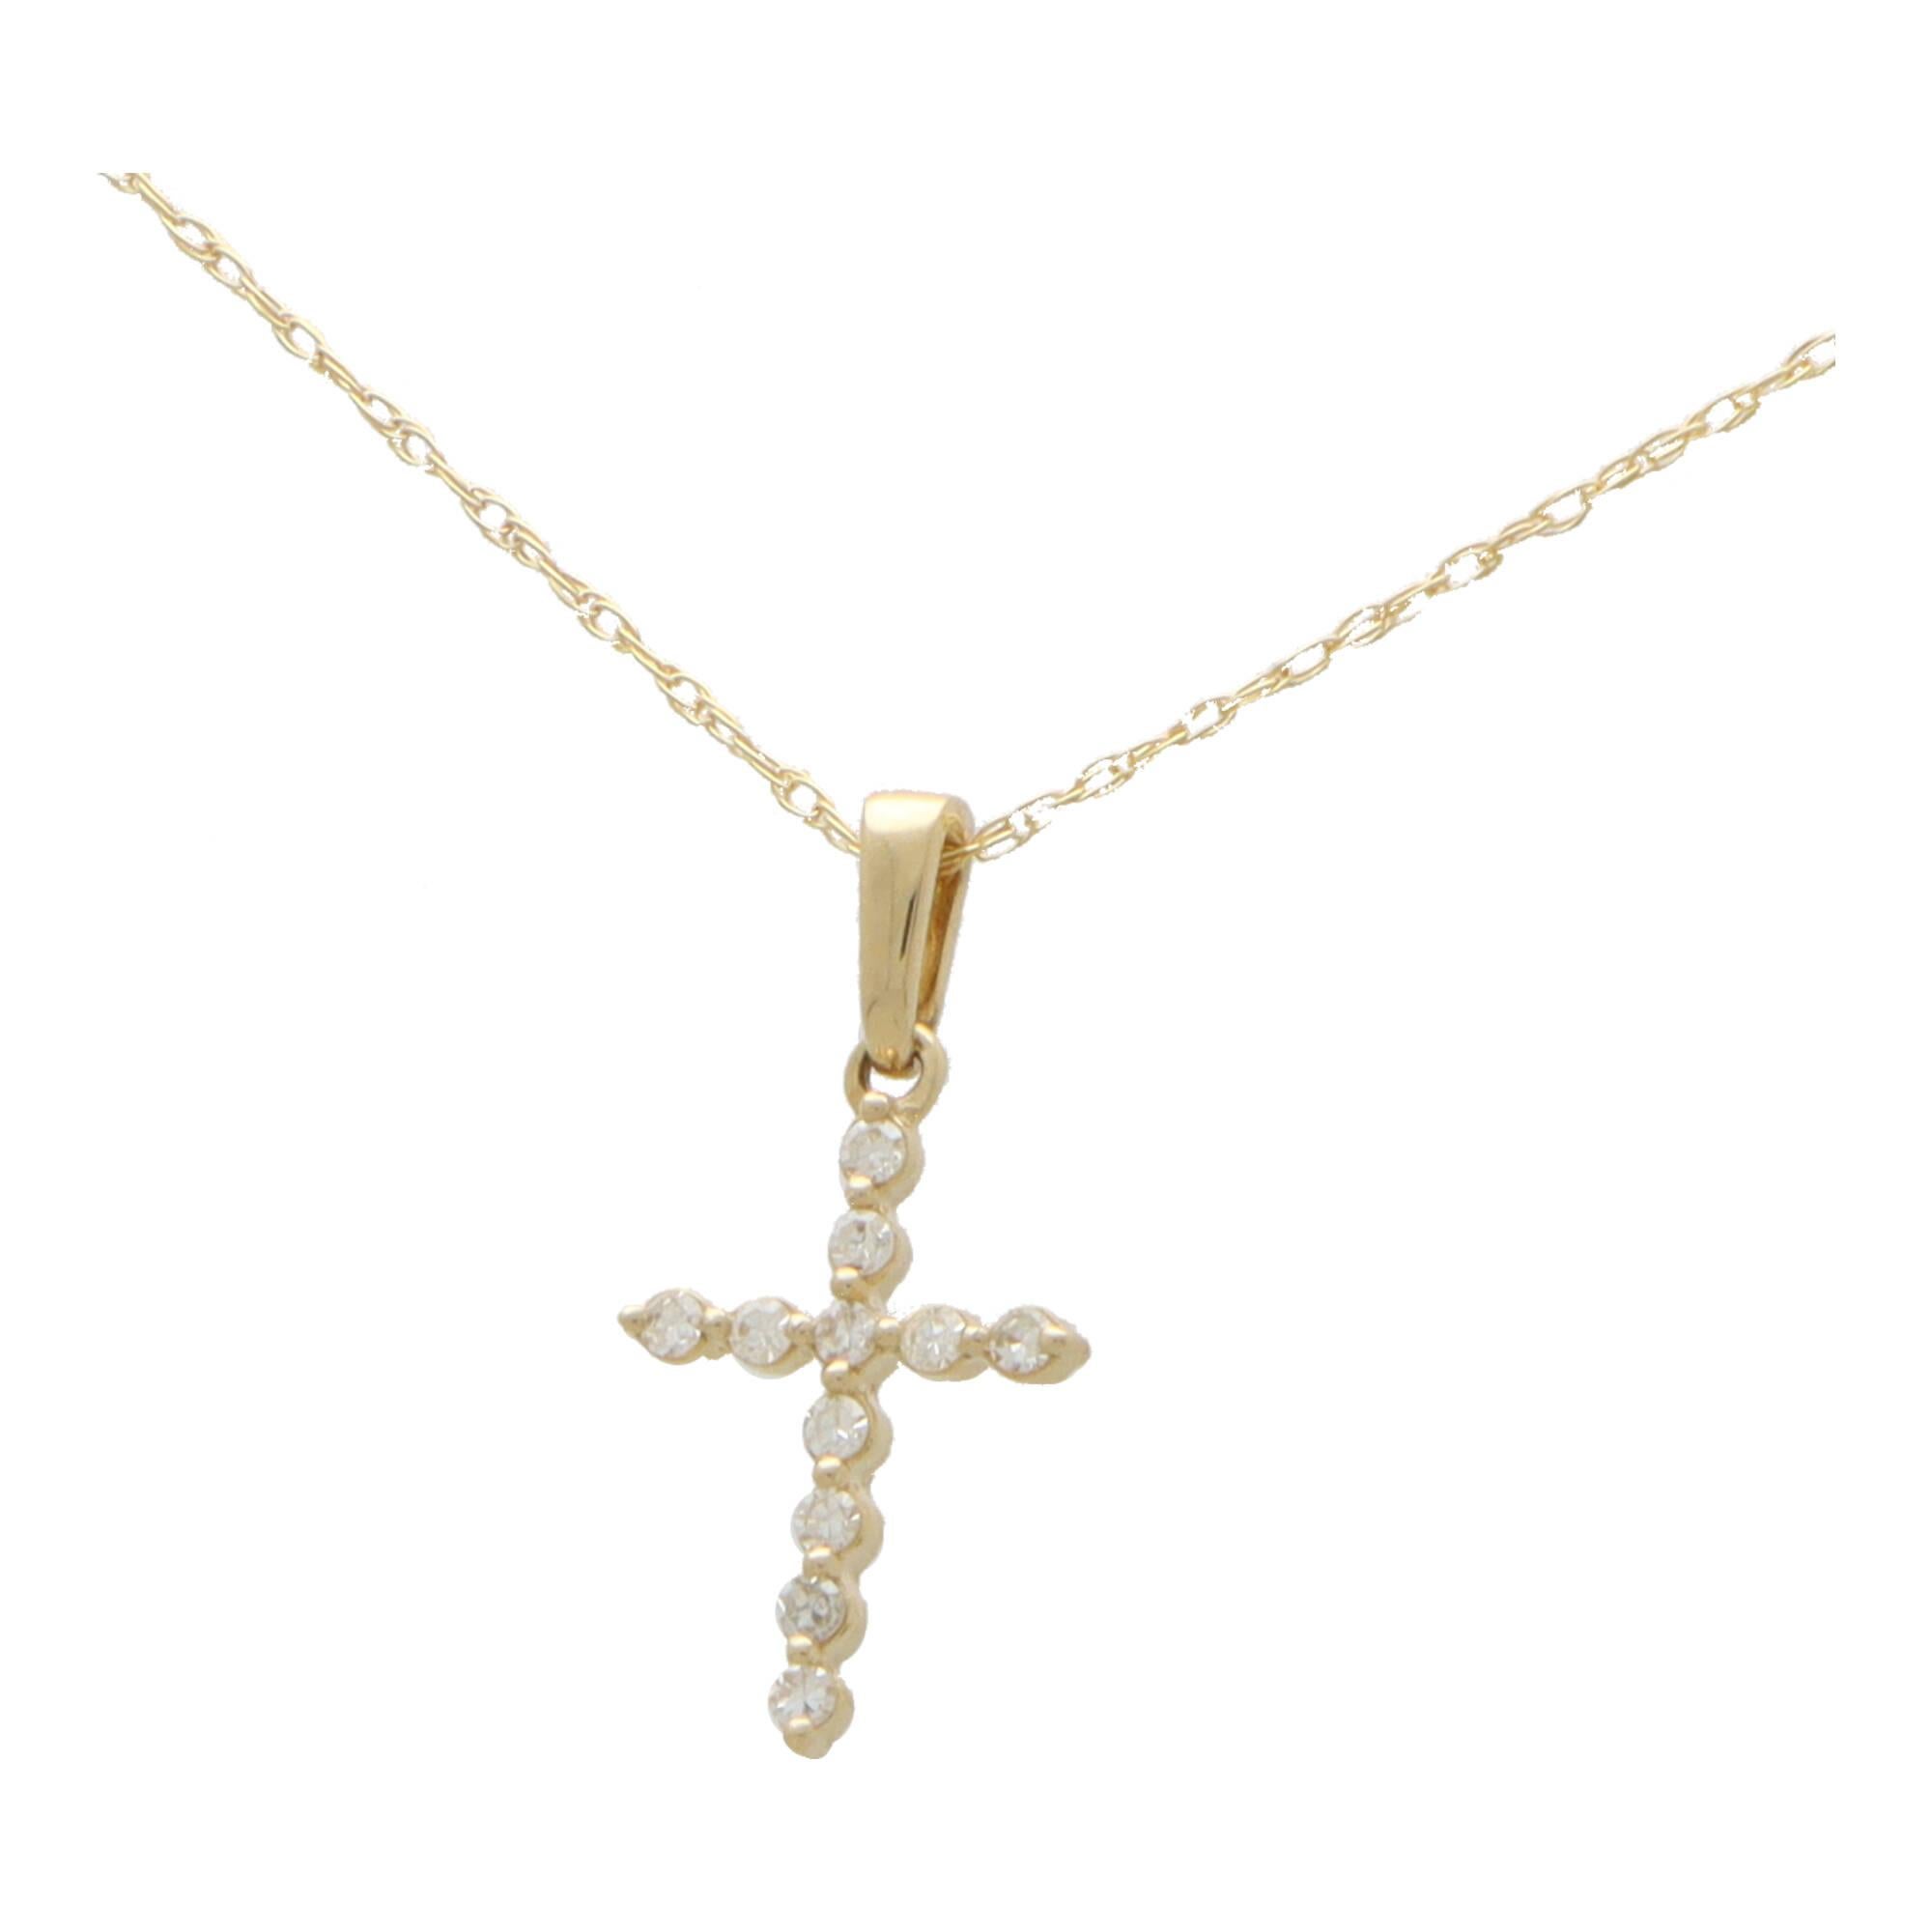  A dainty diamond cross pendant necklace set in 14k yellow gold.

The pendant depicts a cross motif and is claw set with exactly 11 round brilliant cut diamonds. The cross hangs from a yellow gold bail and hangs from a fine 18-inch yellow gold trace